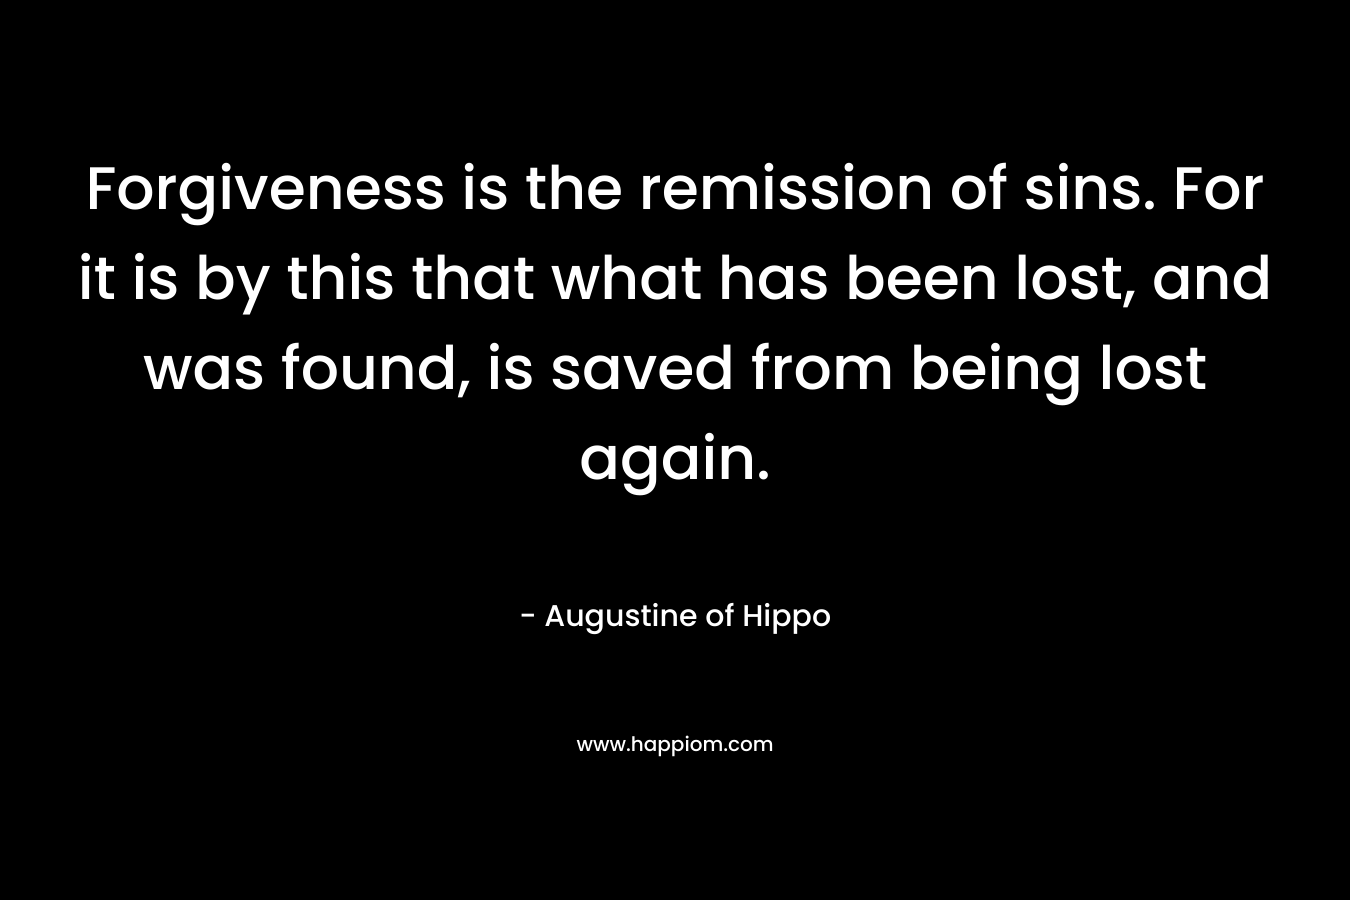 Forgiveness is the remission of sins. For it is by this that what has been lost, and was found, is saved from being lost again. – Augustine of Hippo